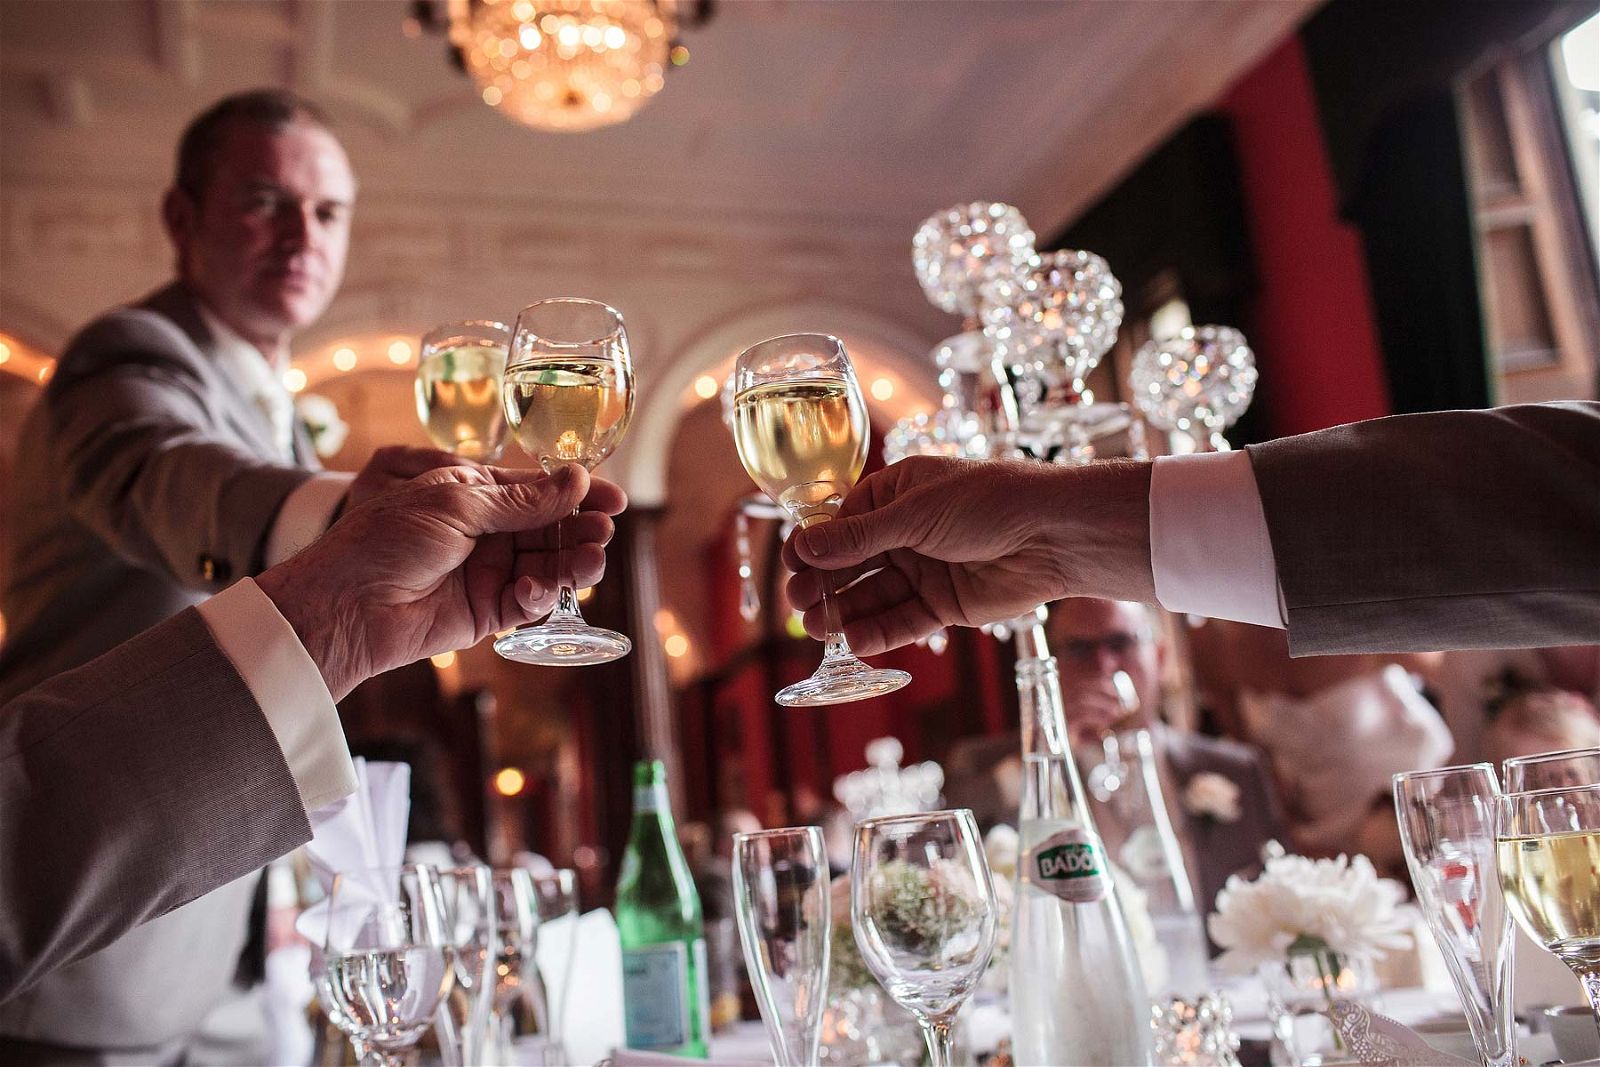 Raising a glass to Bride and Groom at Sandon Hall in Staffordshire by Professional Wedding Photographer Stuart James